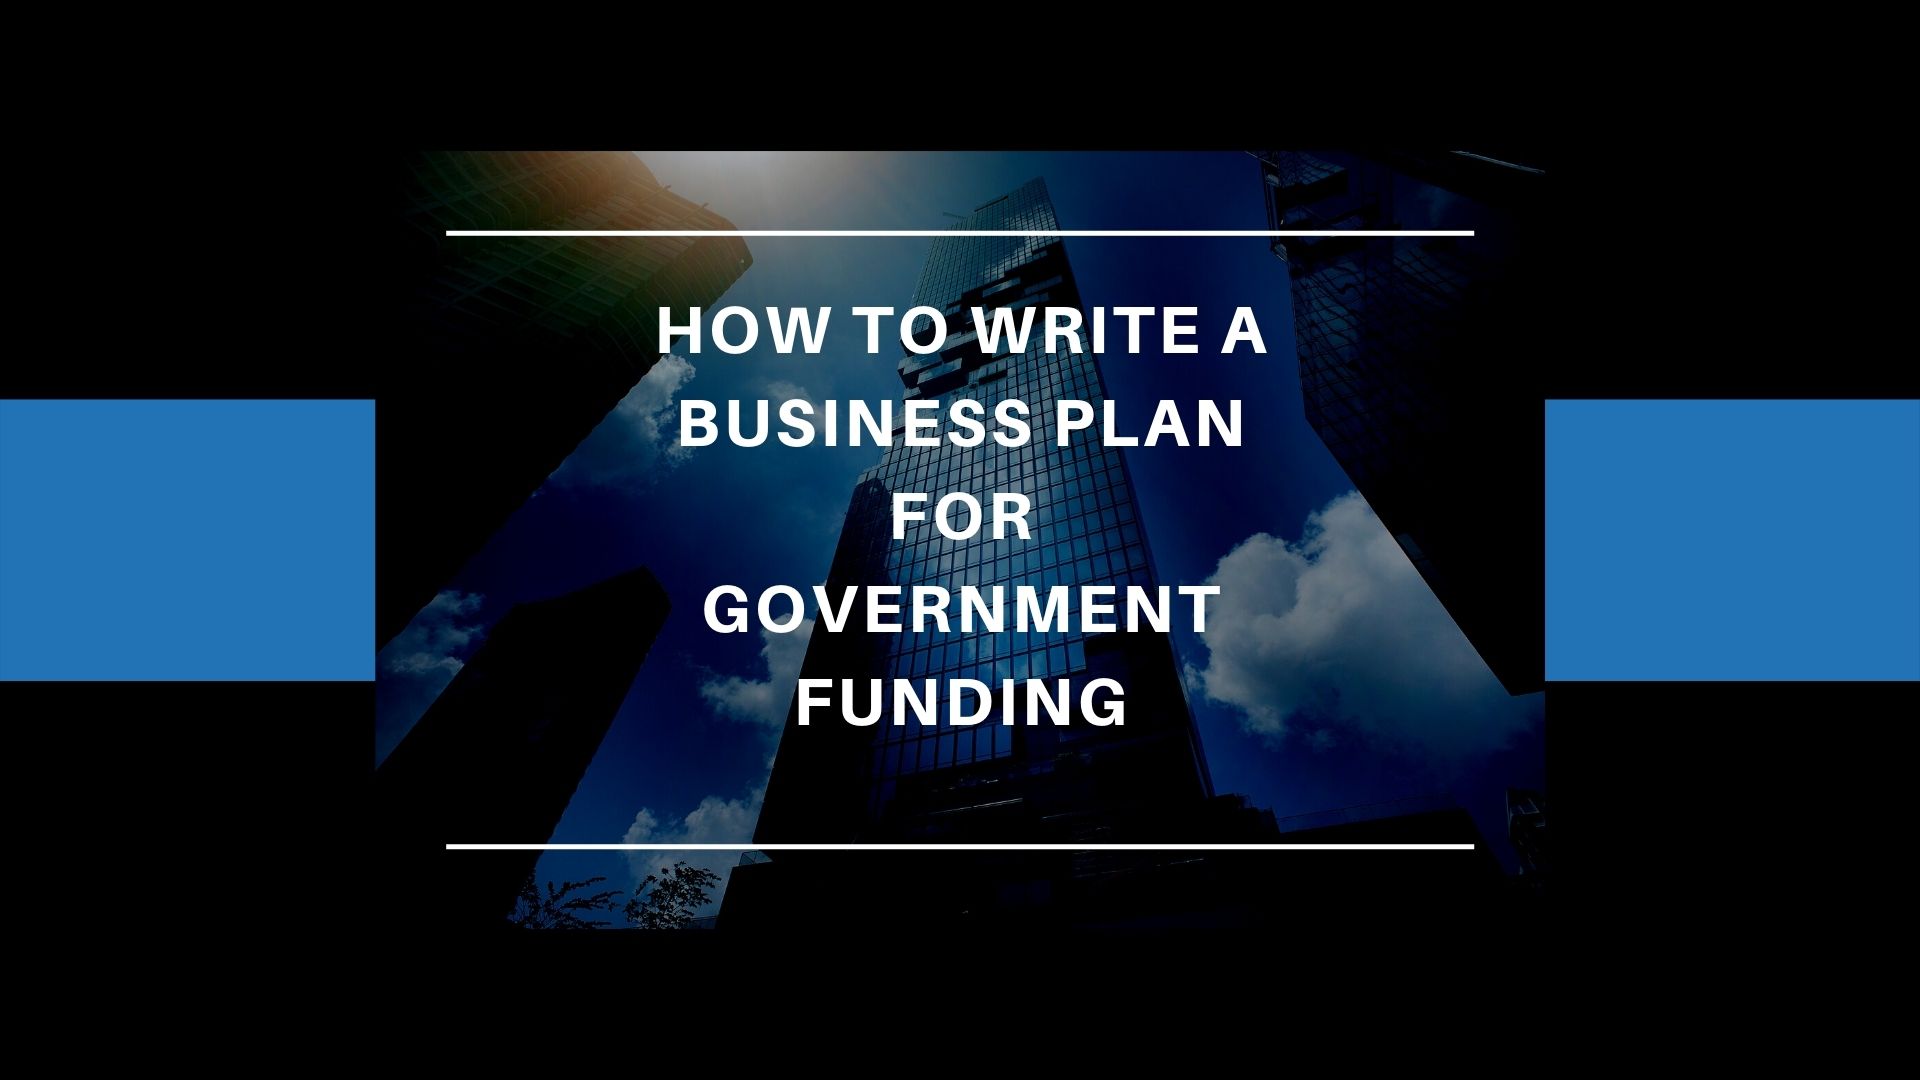 How to Write a Business Plan for Government Funding